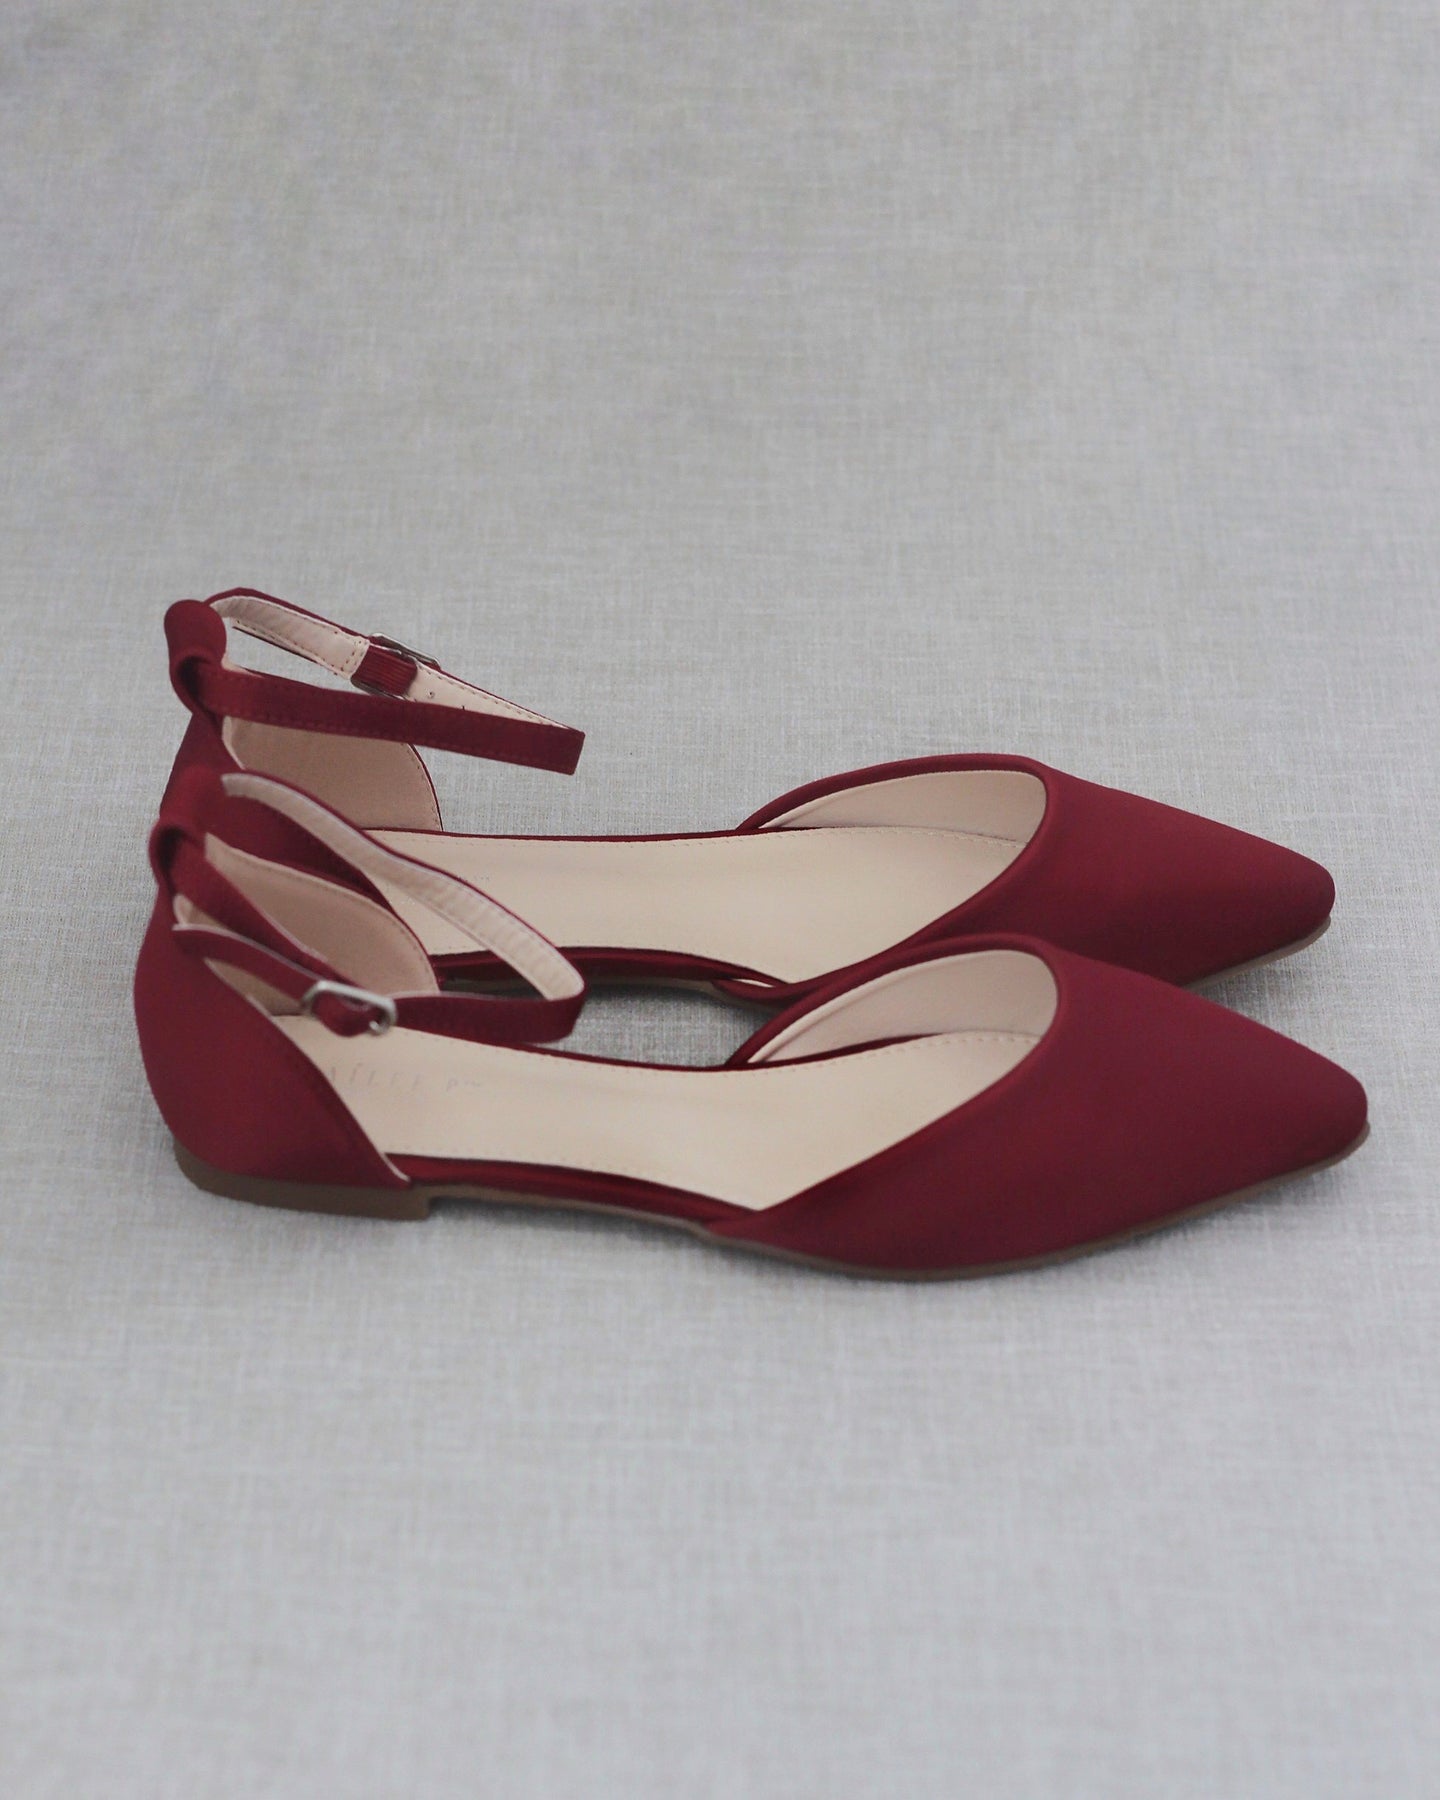 Burgundy Satin Flats with Ankle Strap - Wedding Shoes, Bridesmaids ...